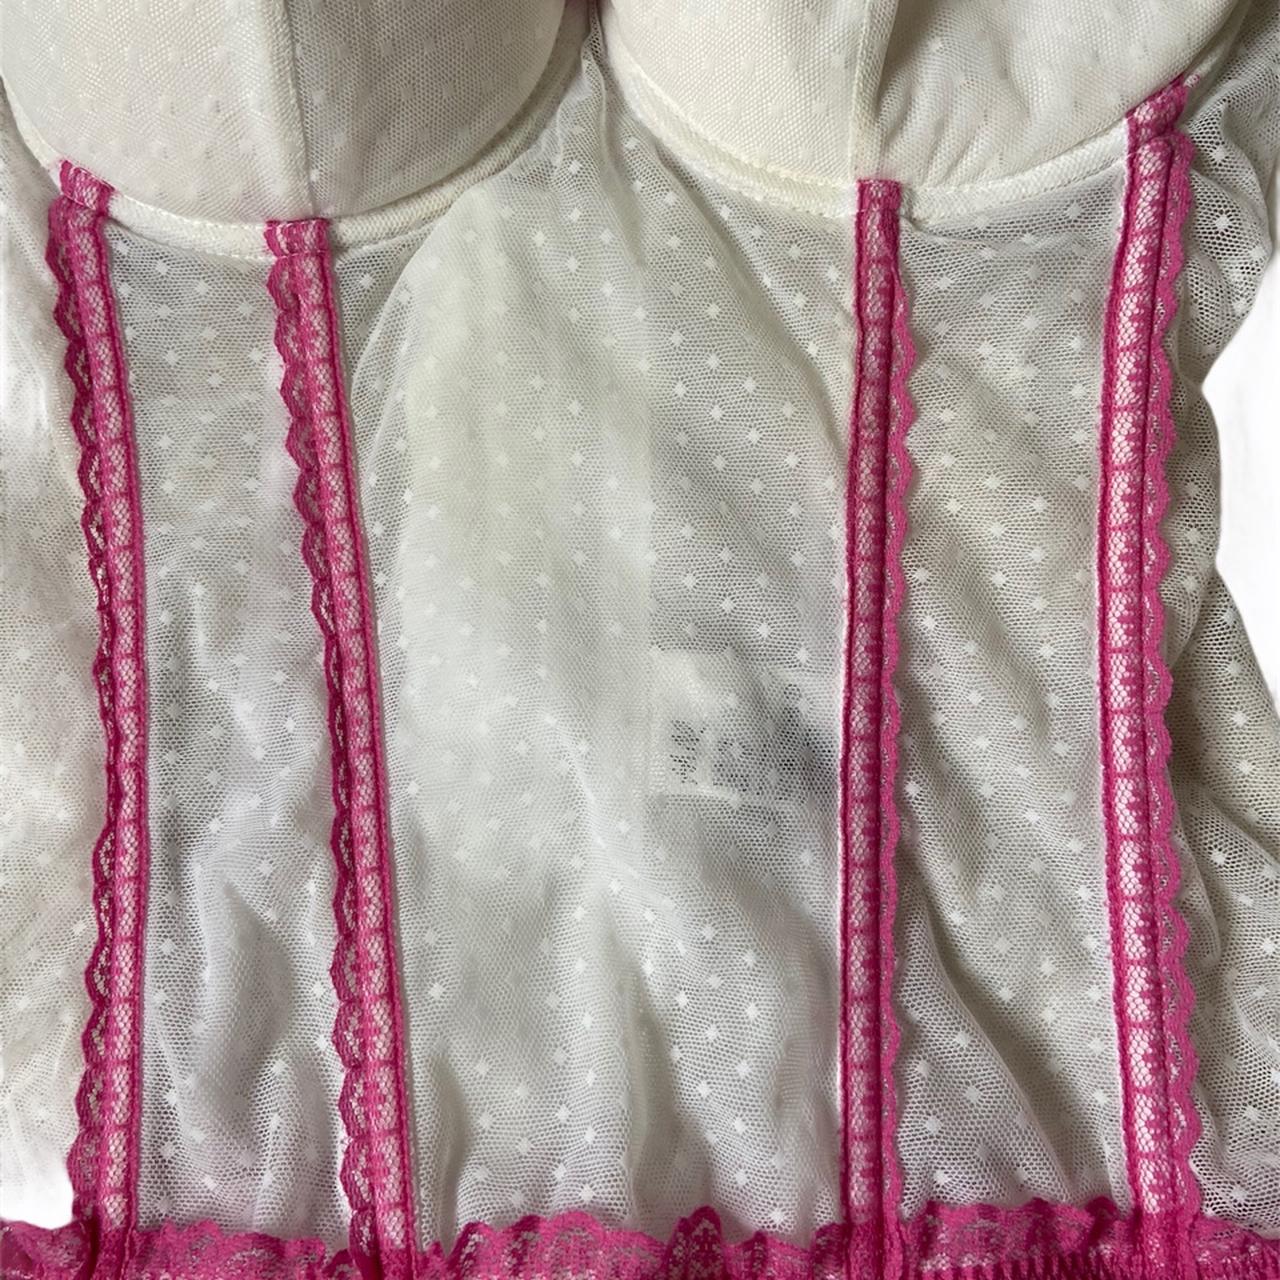 Women's White and Pink Corset | Depop